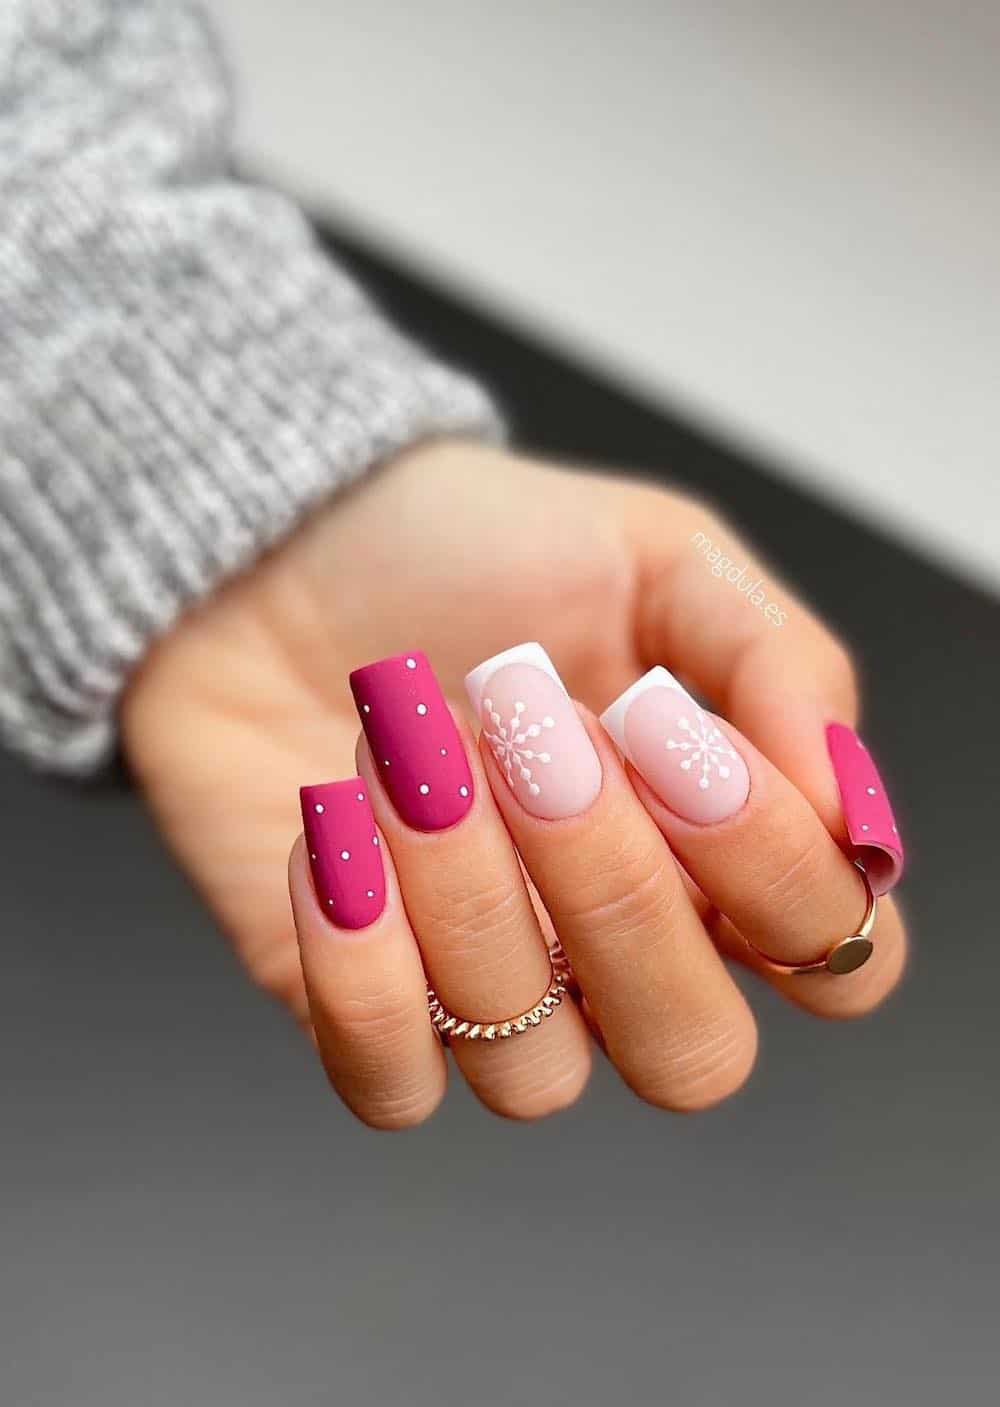 A hand with long square nails painted a matte magenta with white dot details and white French tip accent nails with snowflakes